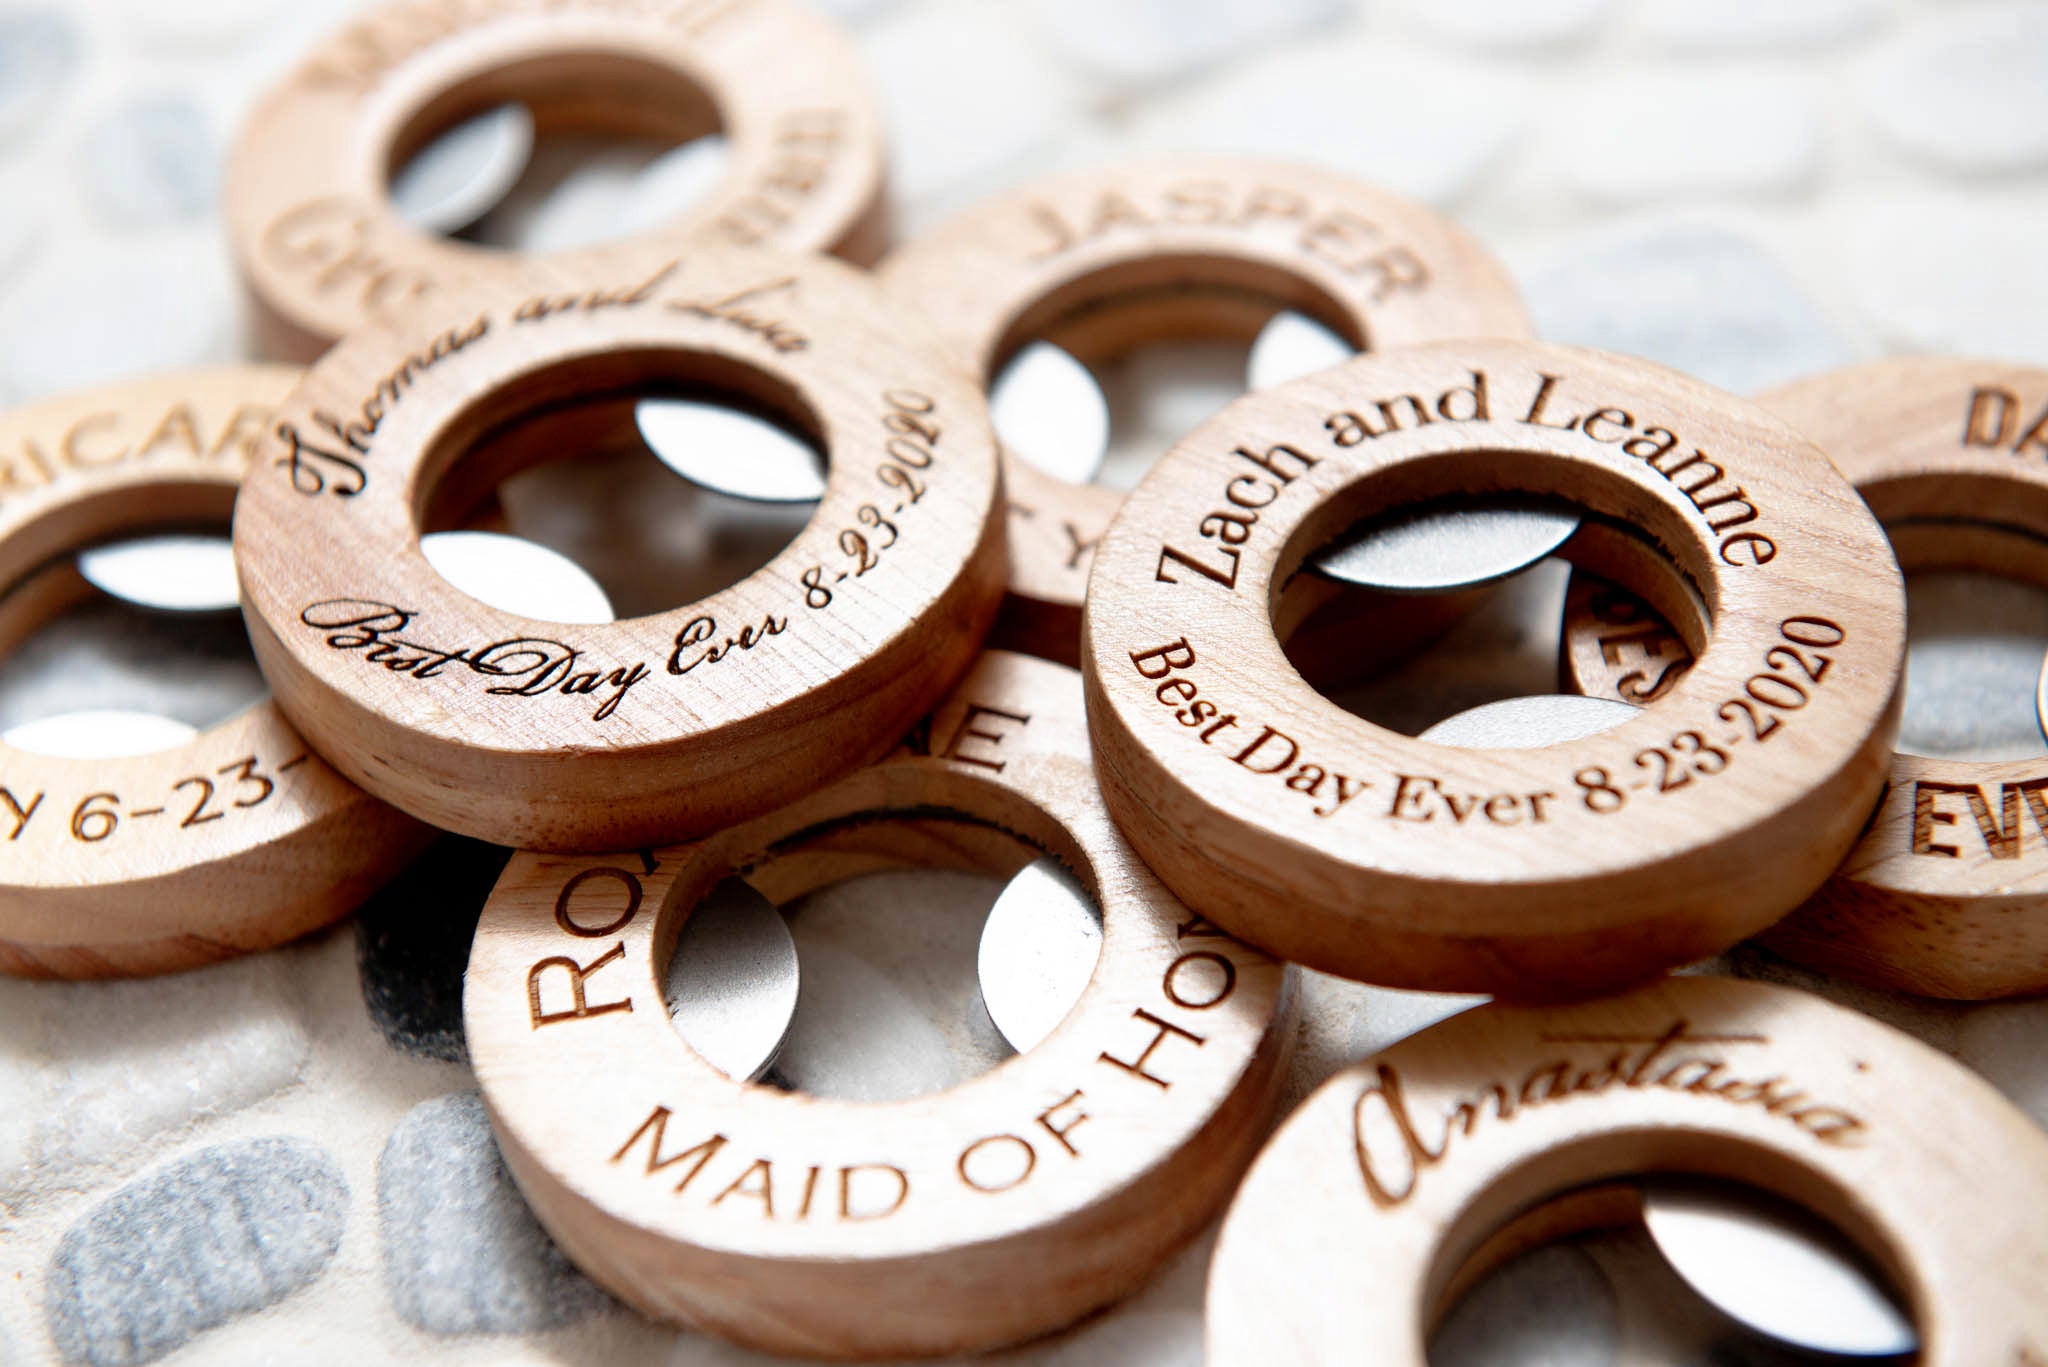 Party Favors for Adults, Beer Bottle Opener